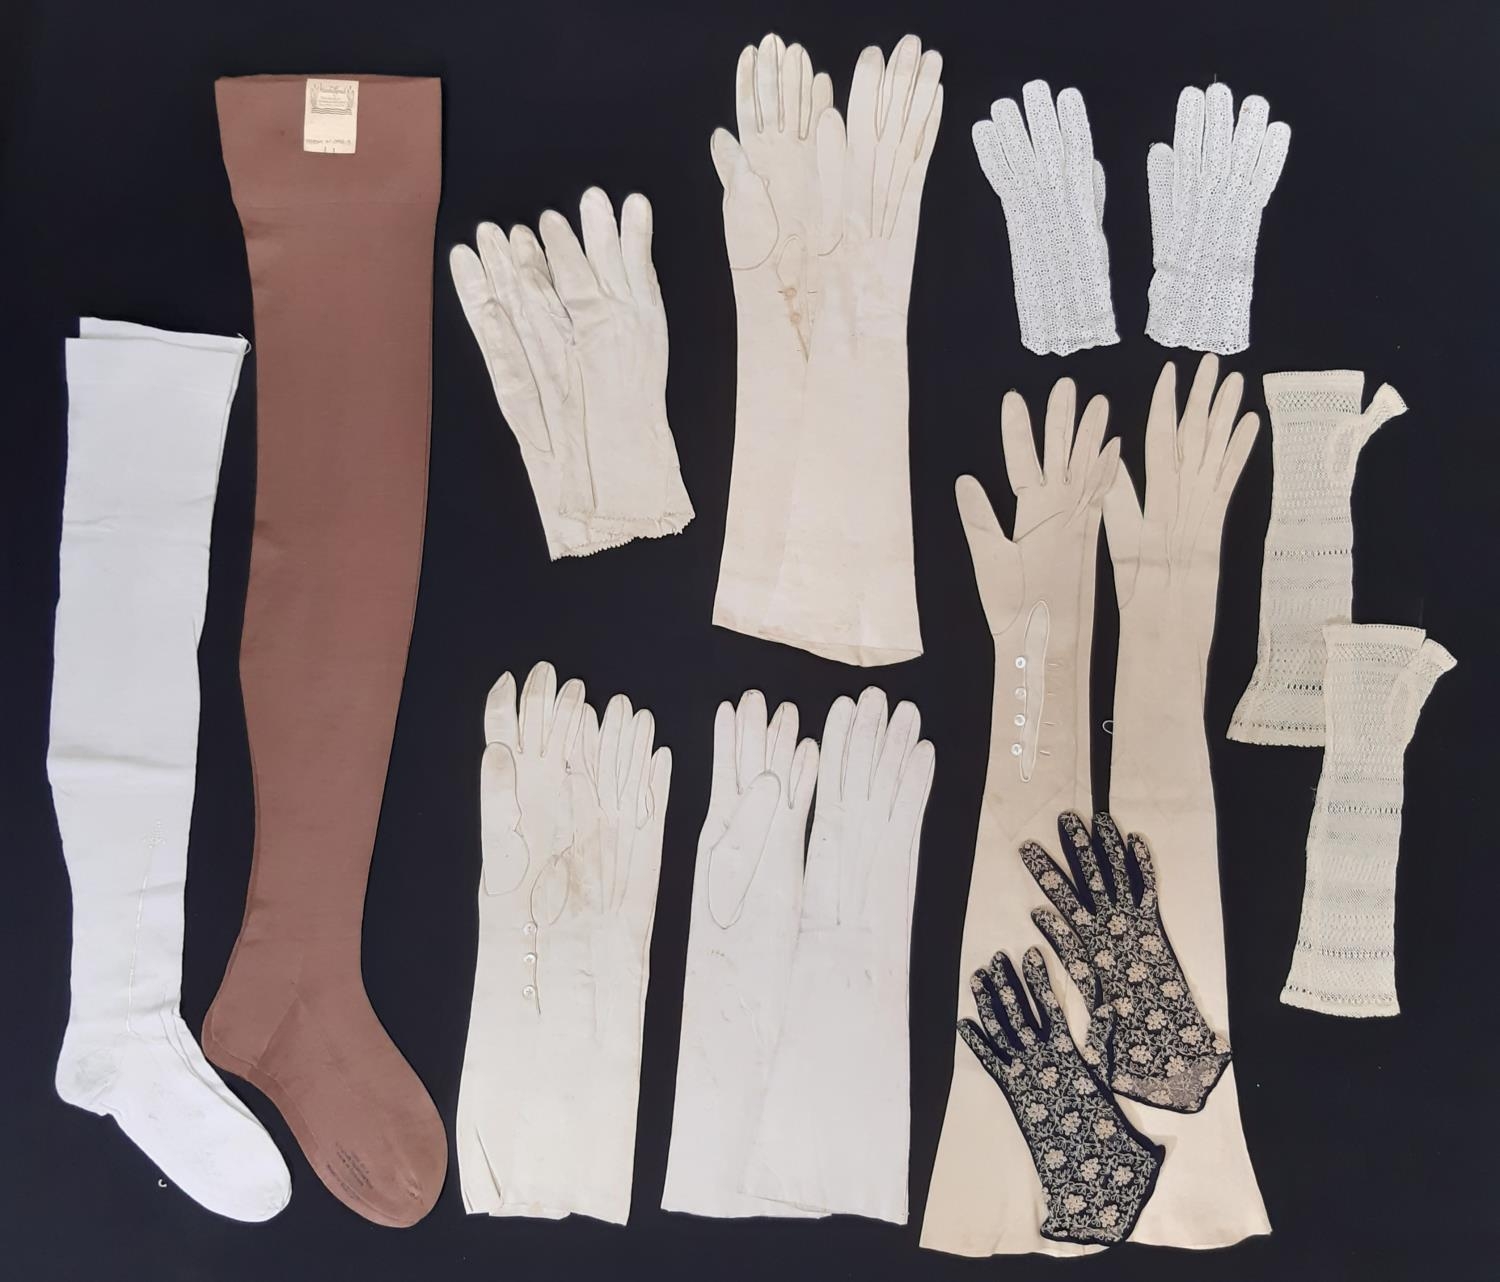 Collection of late 19th to mid 20th century stockings and gloves, including 1940's brown silk/